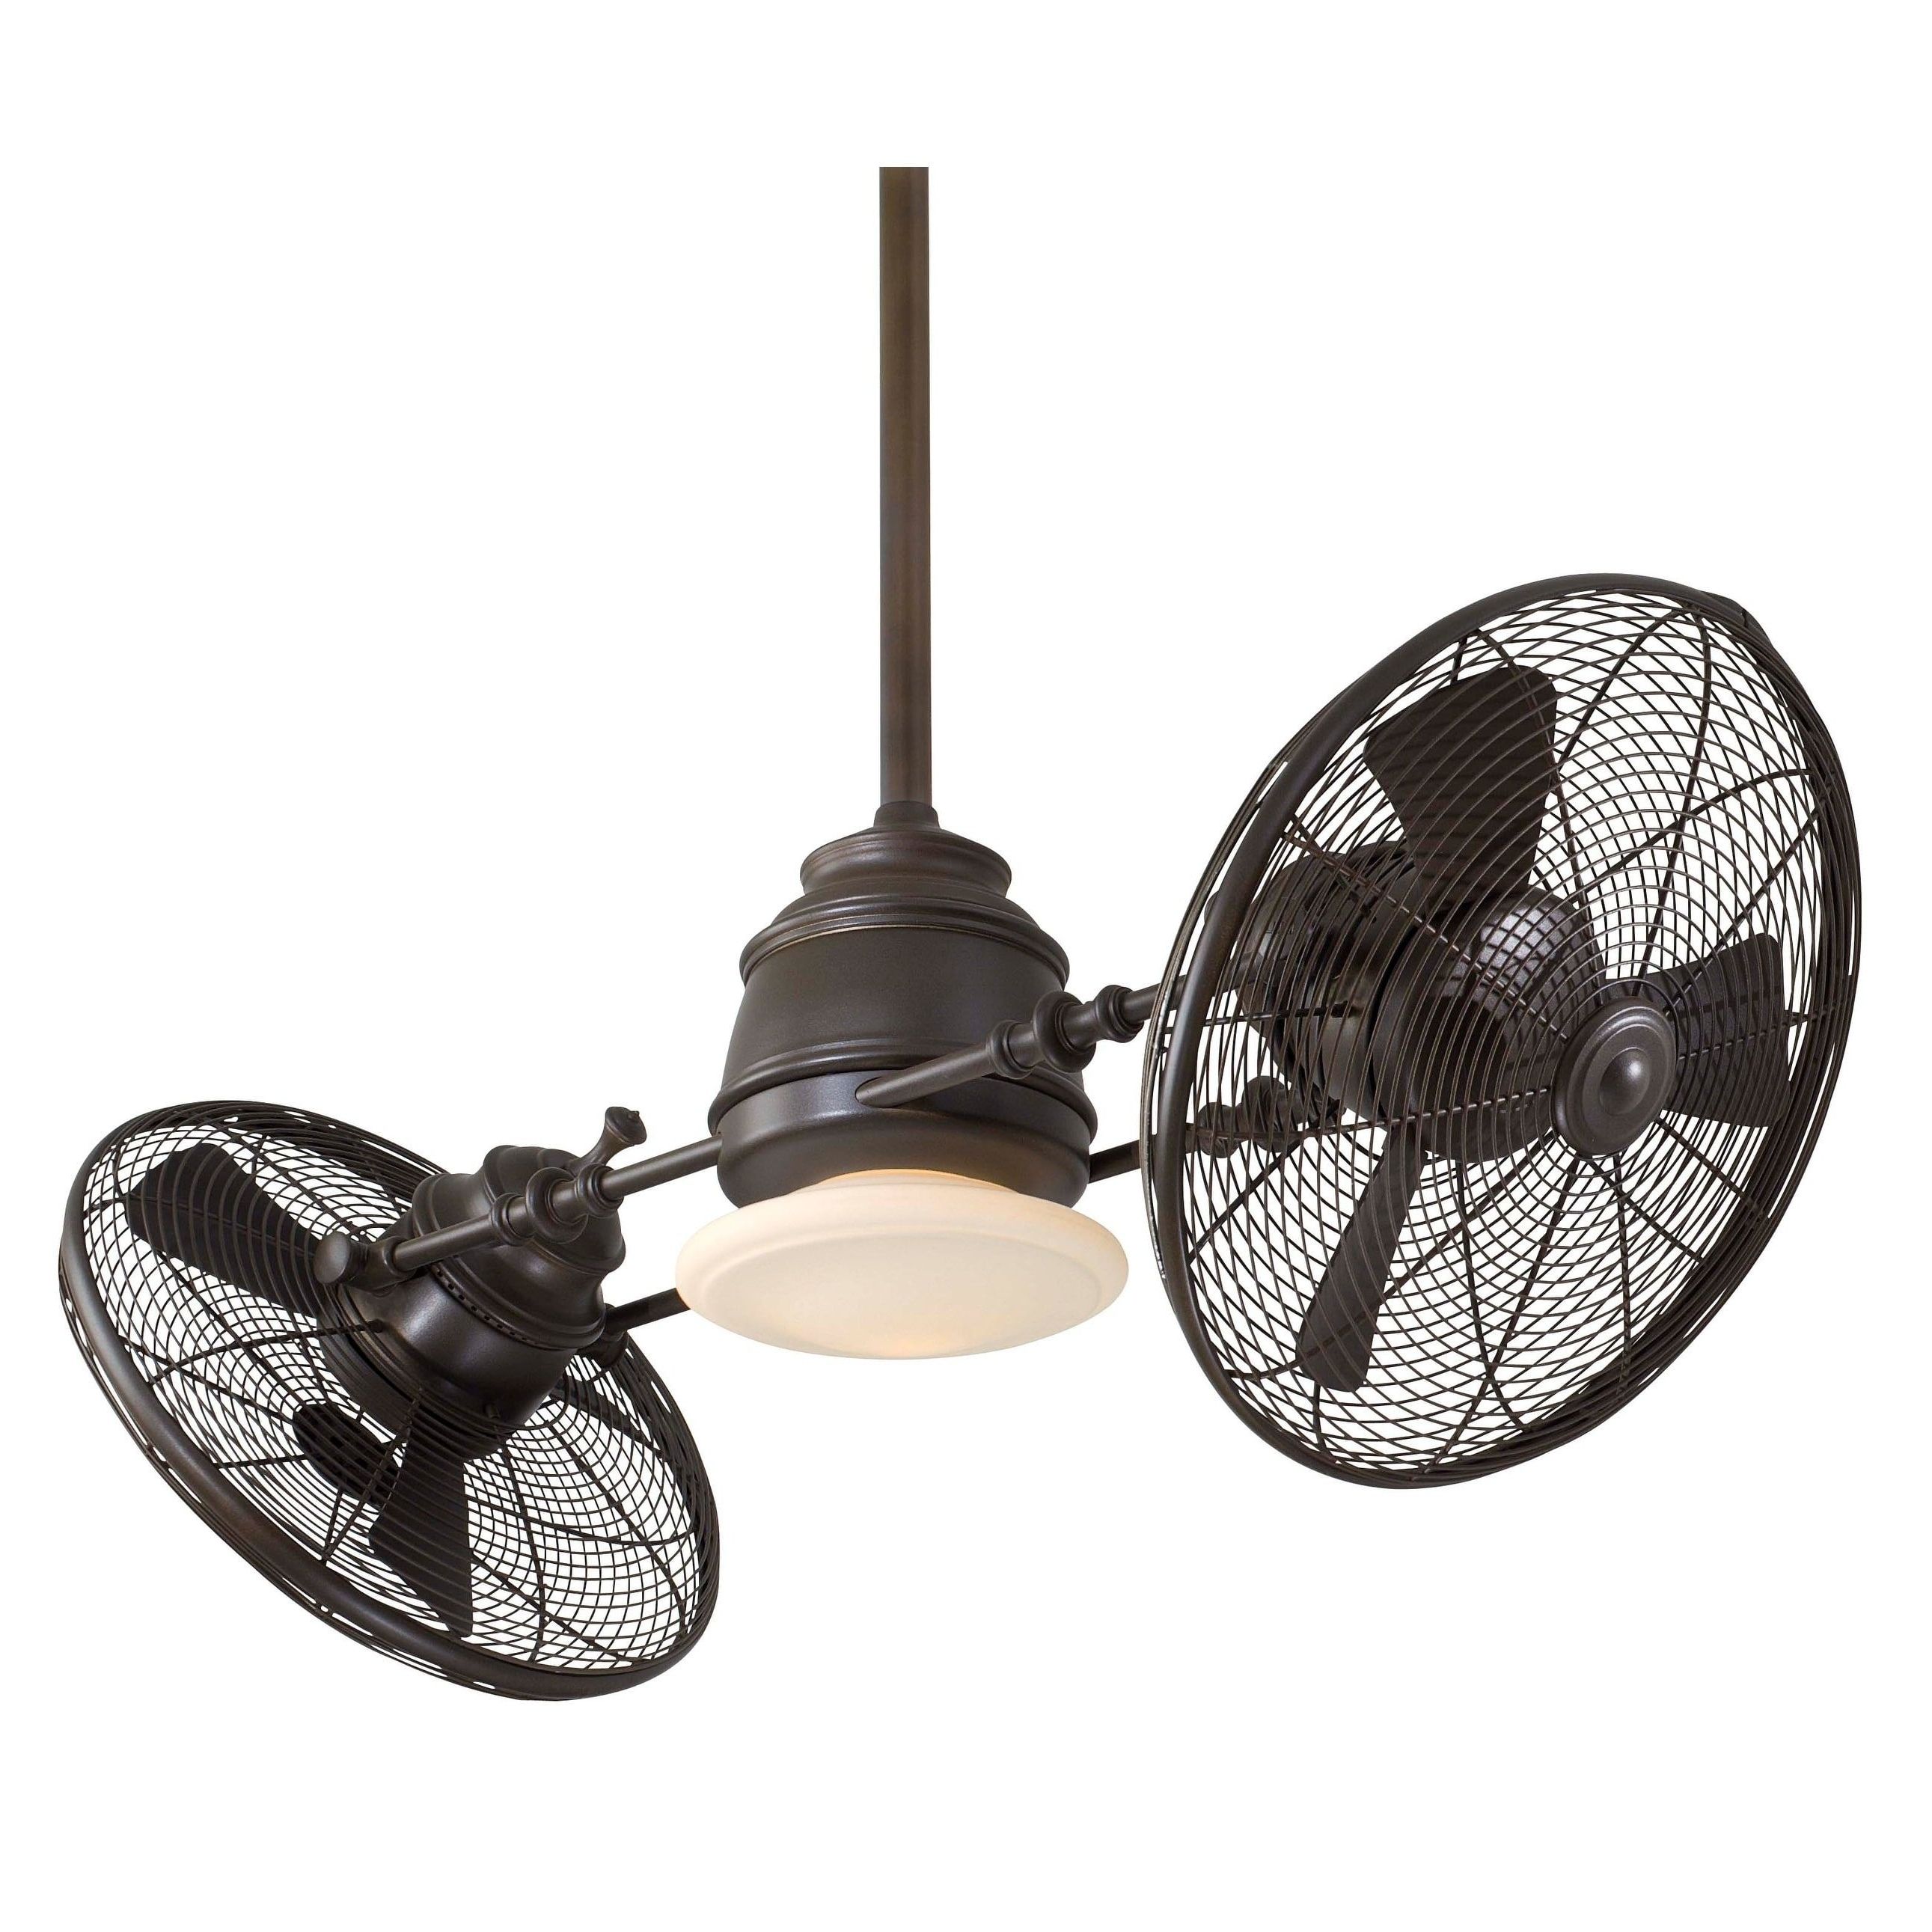 Vintage Outdoor Ceiling Fans Inside Latest Minkaaire Minka Aire Vintage Gyro Oil Rubbed Bronze Finished Bronze (View 7 of 20)